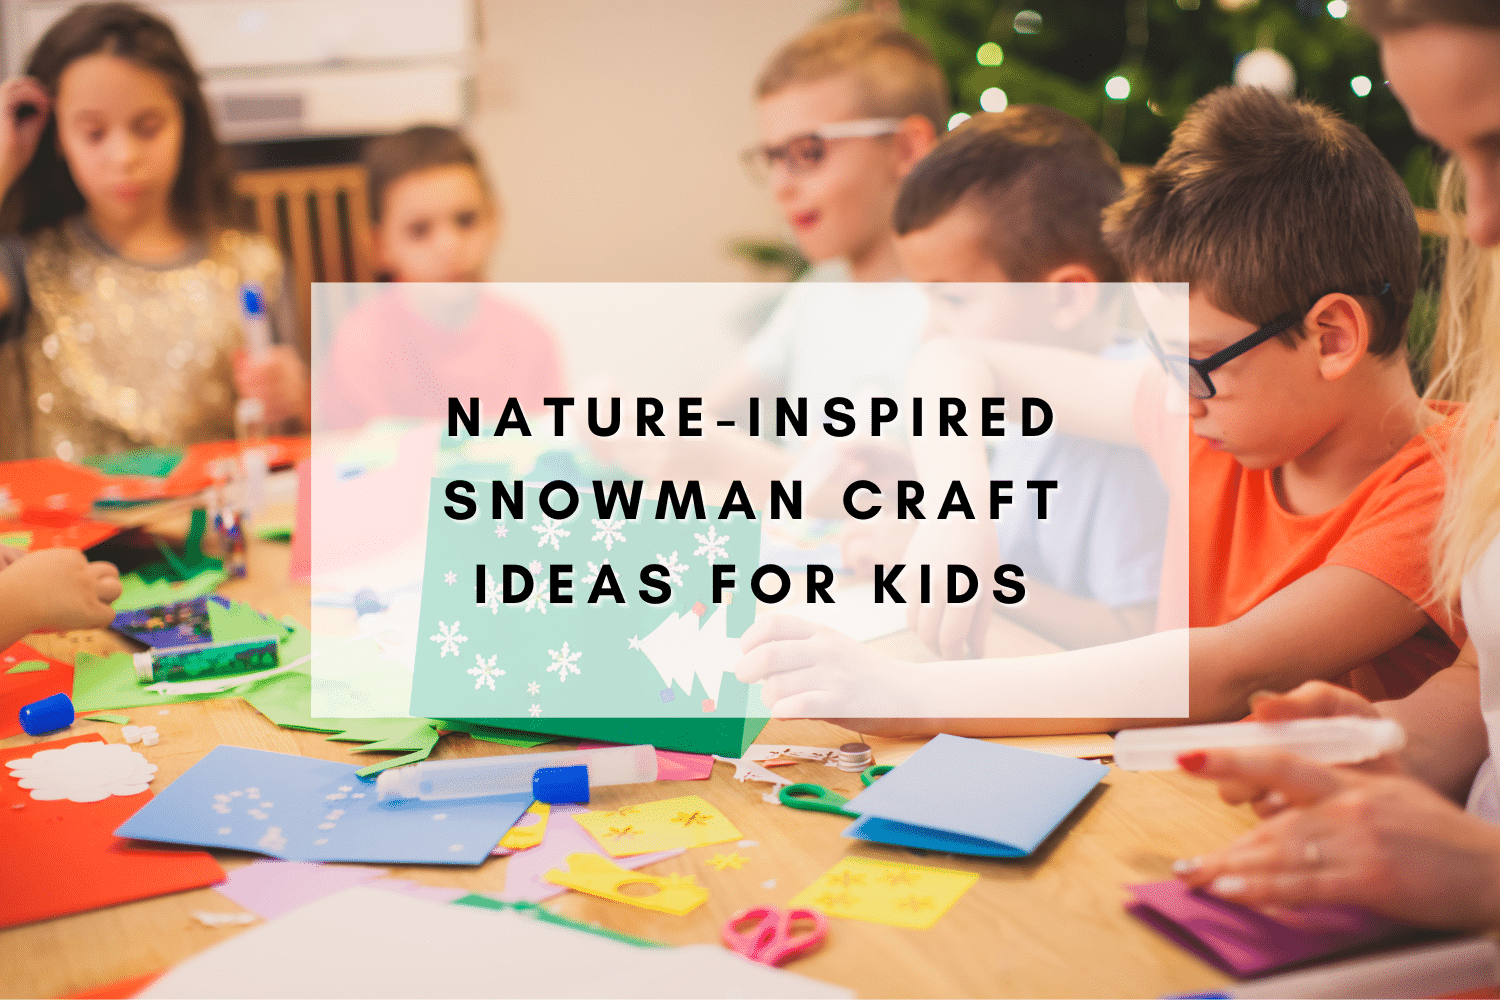 Nature-Inspired Snowman Crafts for Kids